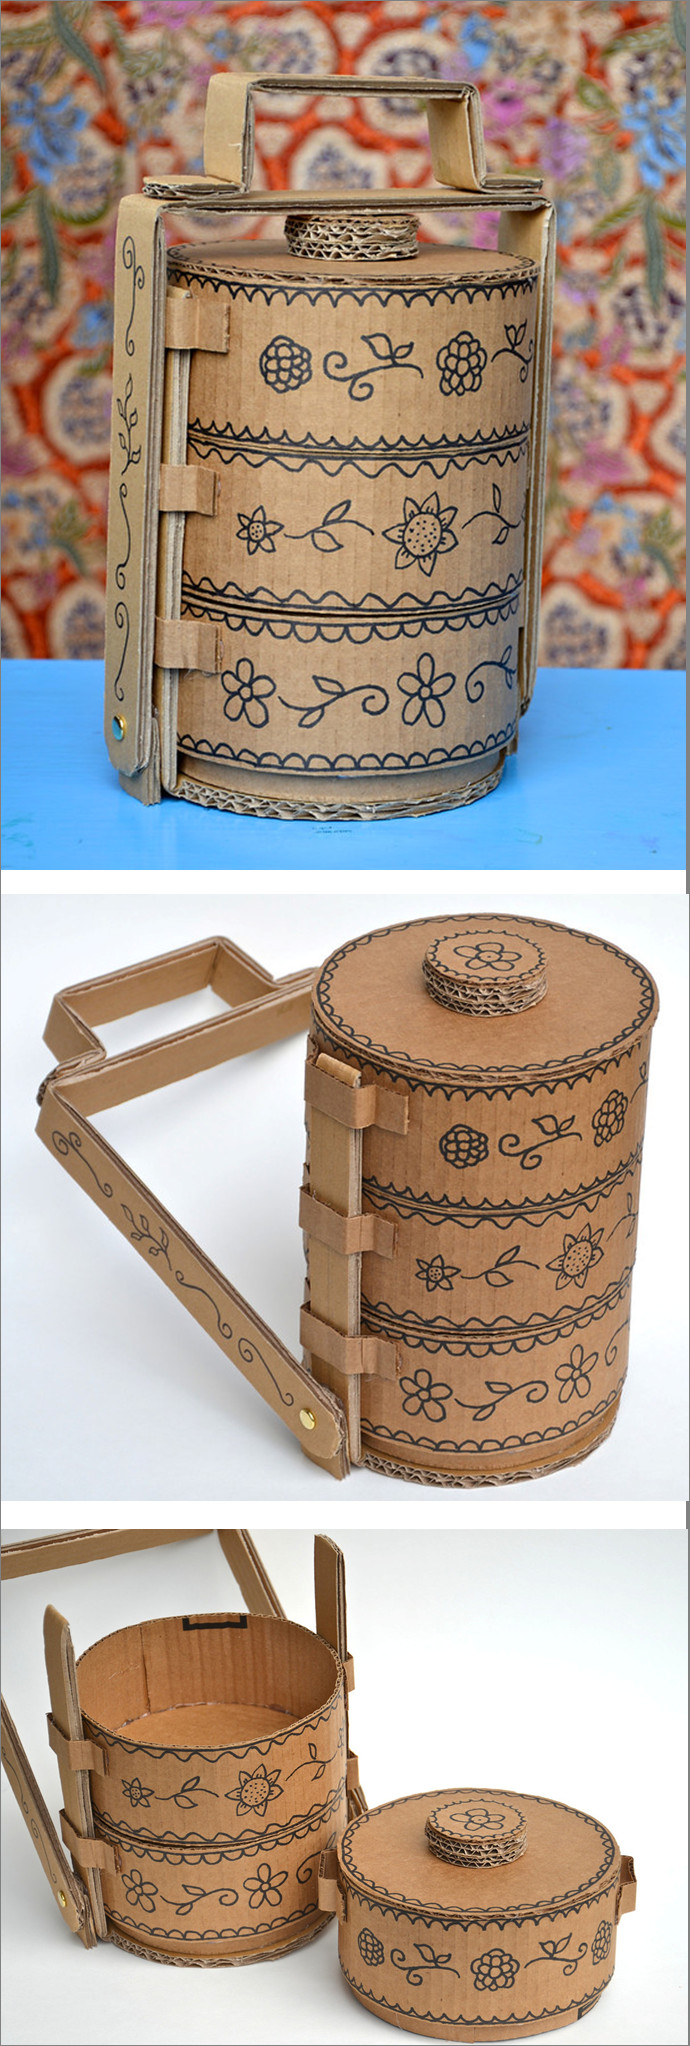 DIY Cardboard Box Projects
 DIY Tiffin boxes made from cardboard With images